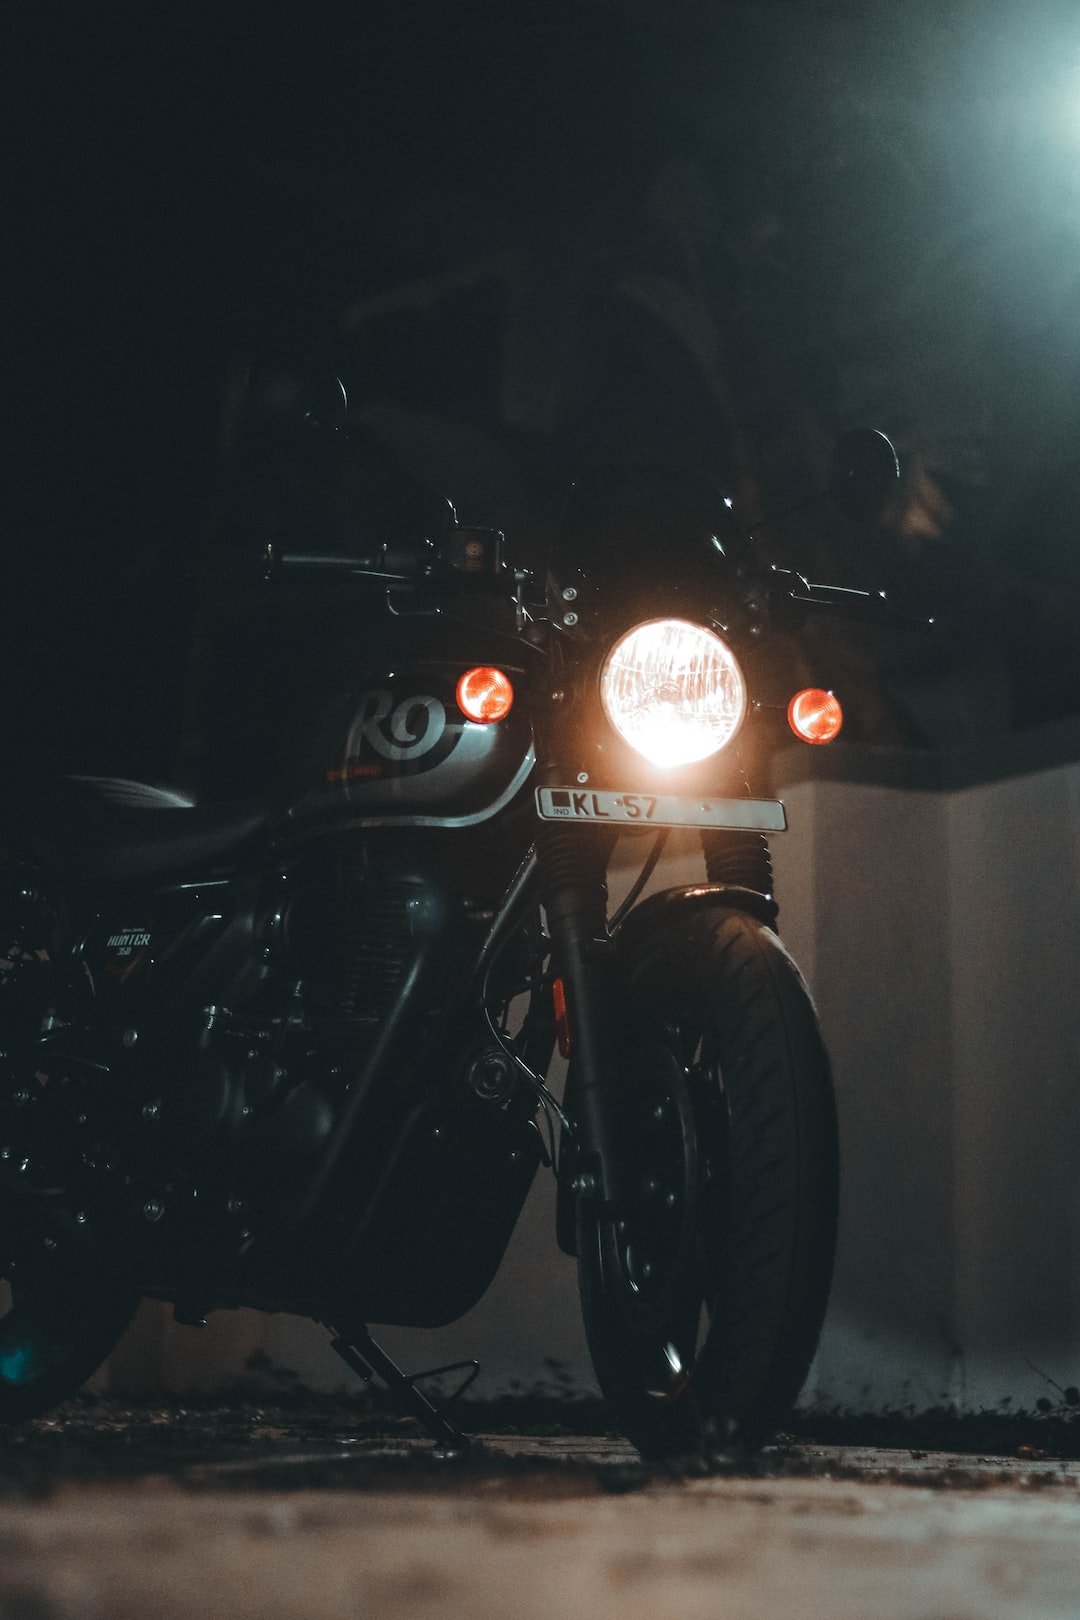 a motorcycle parked in a dark room with a light on